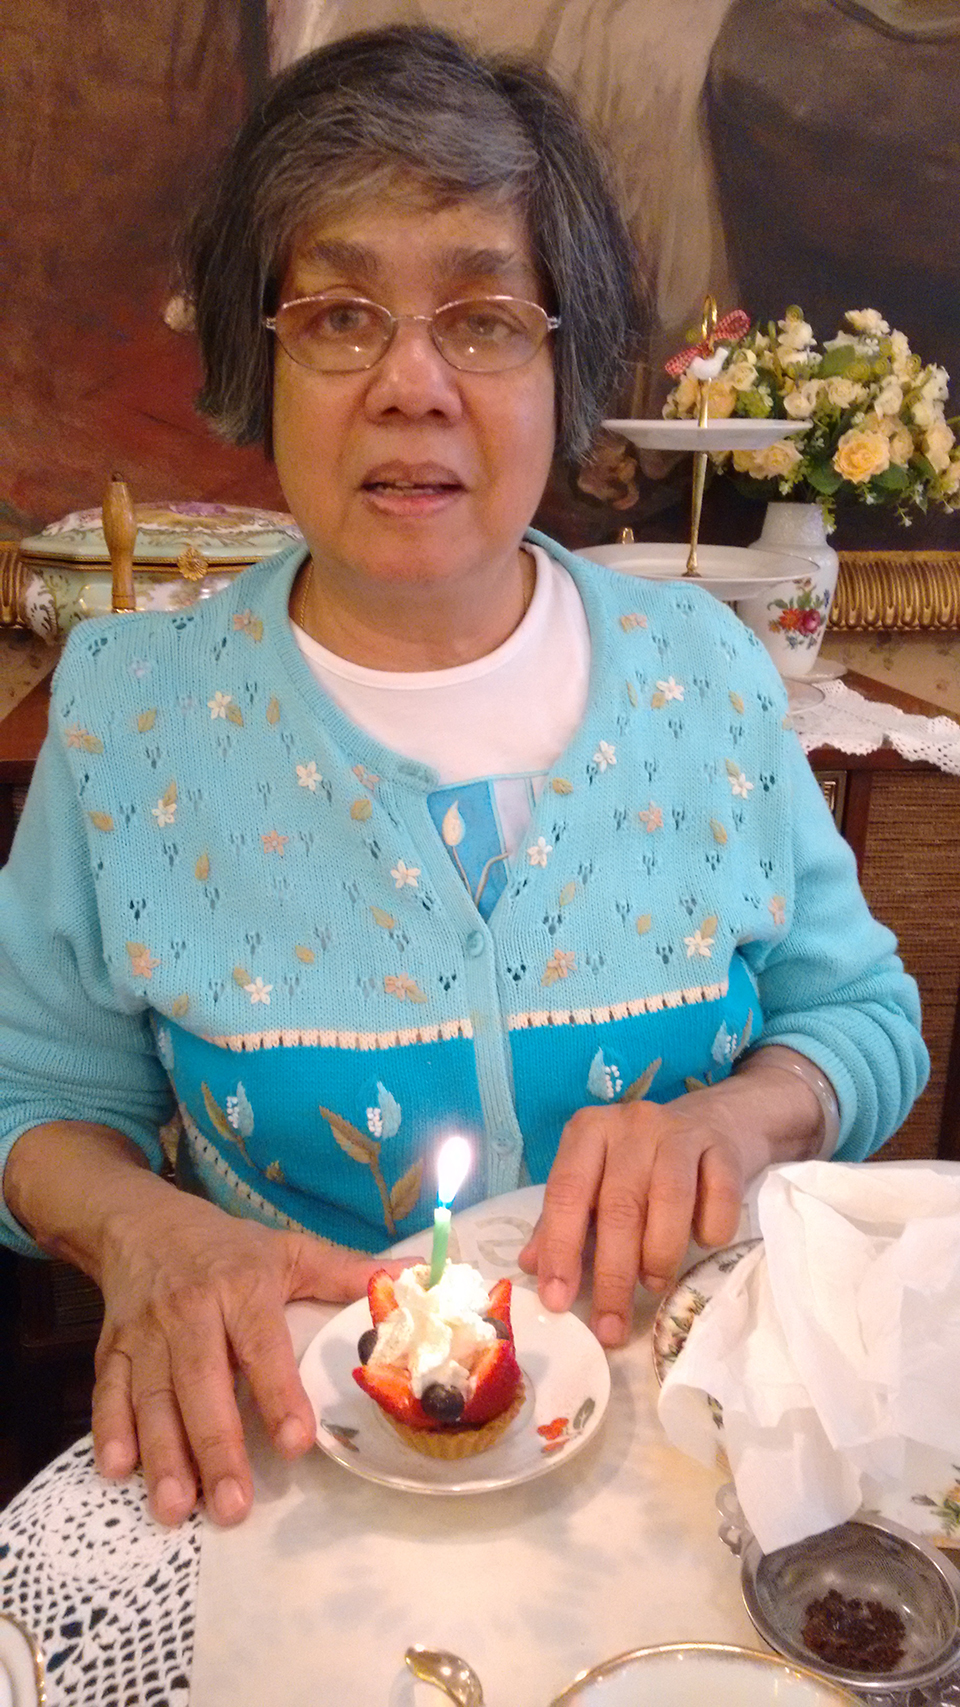 Donna blowing out a candle at her birthday tea. May 2019.